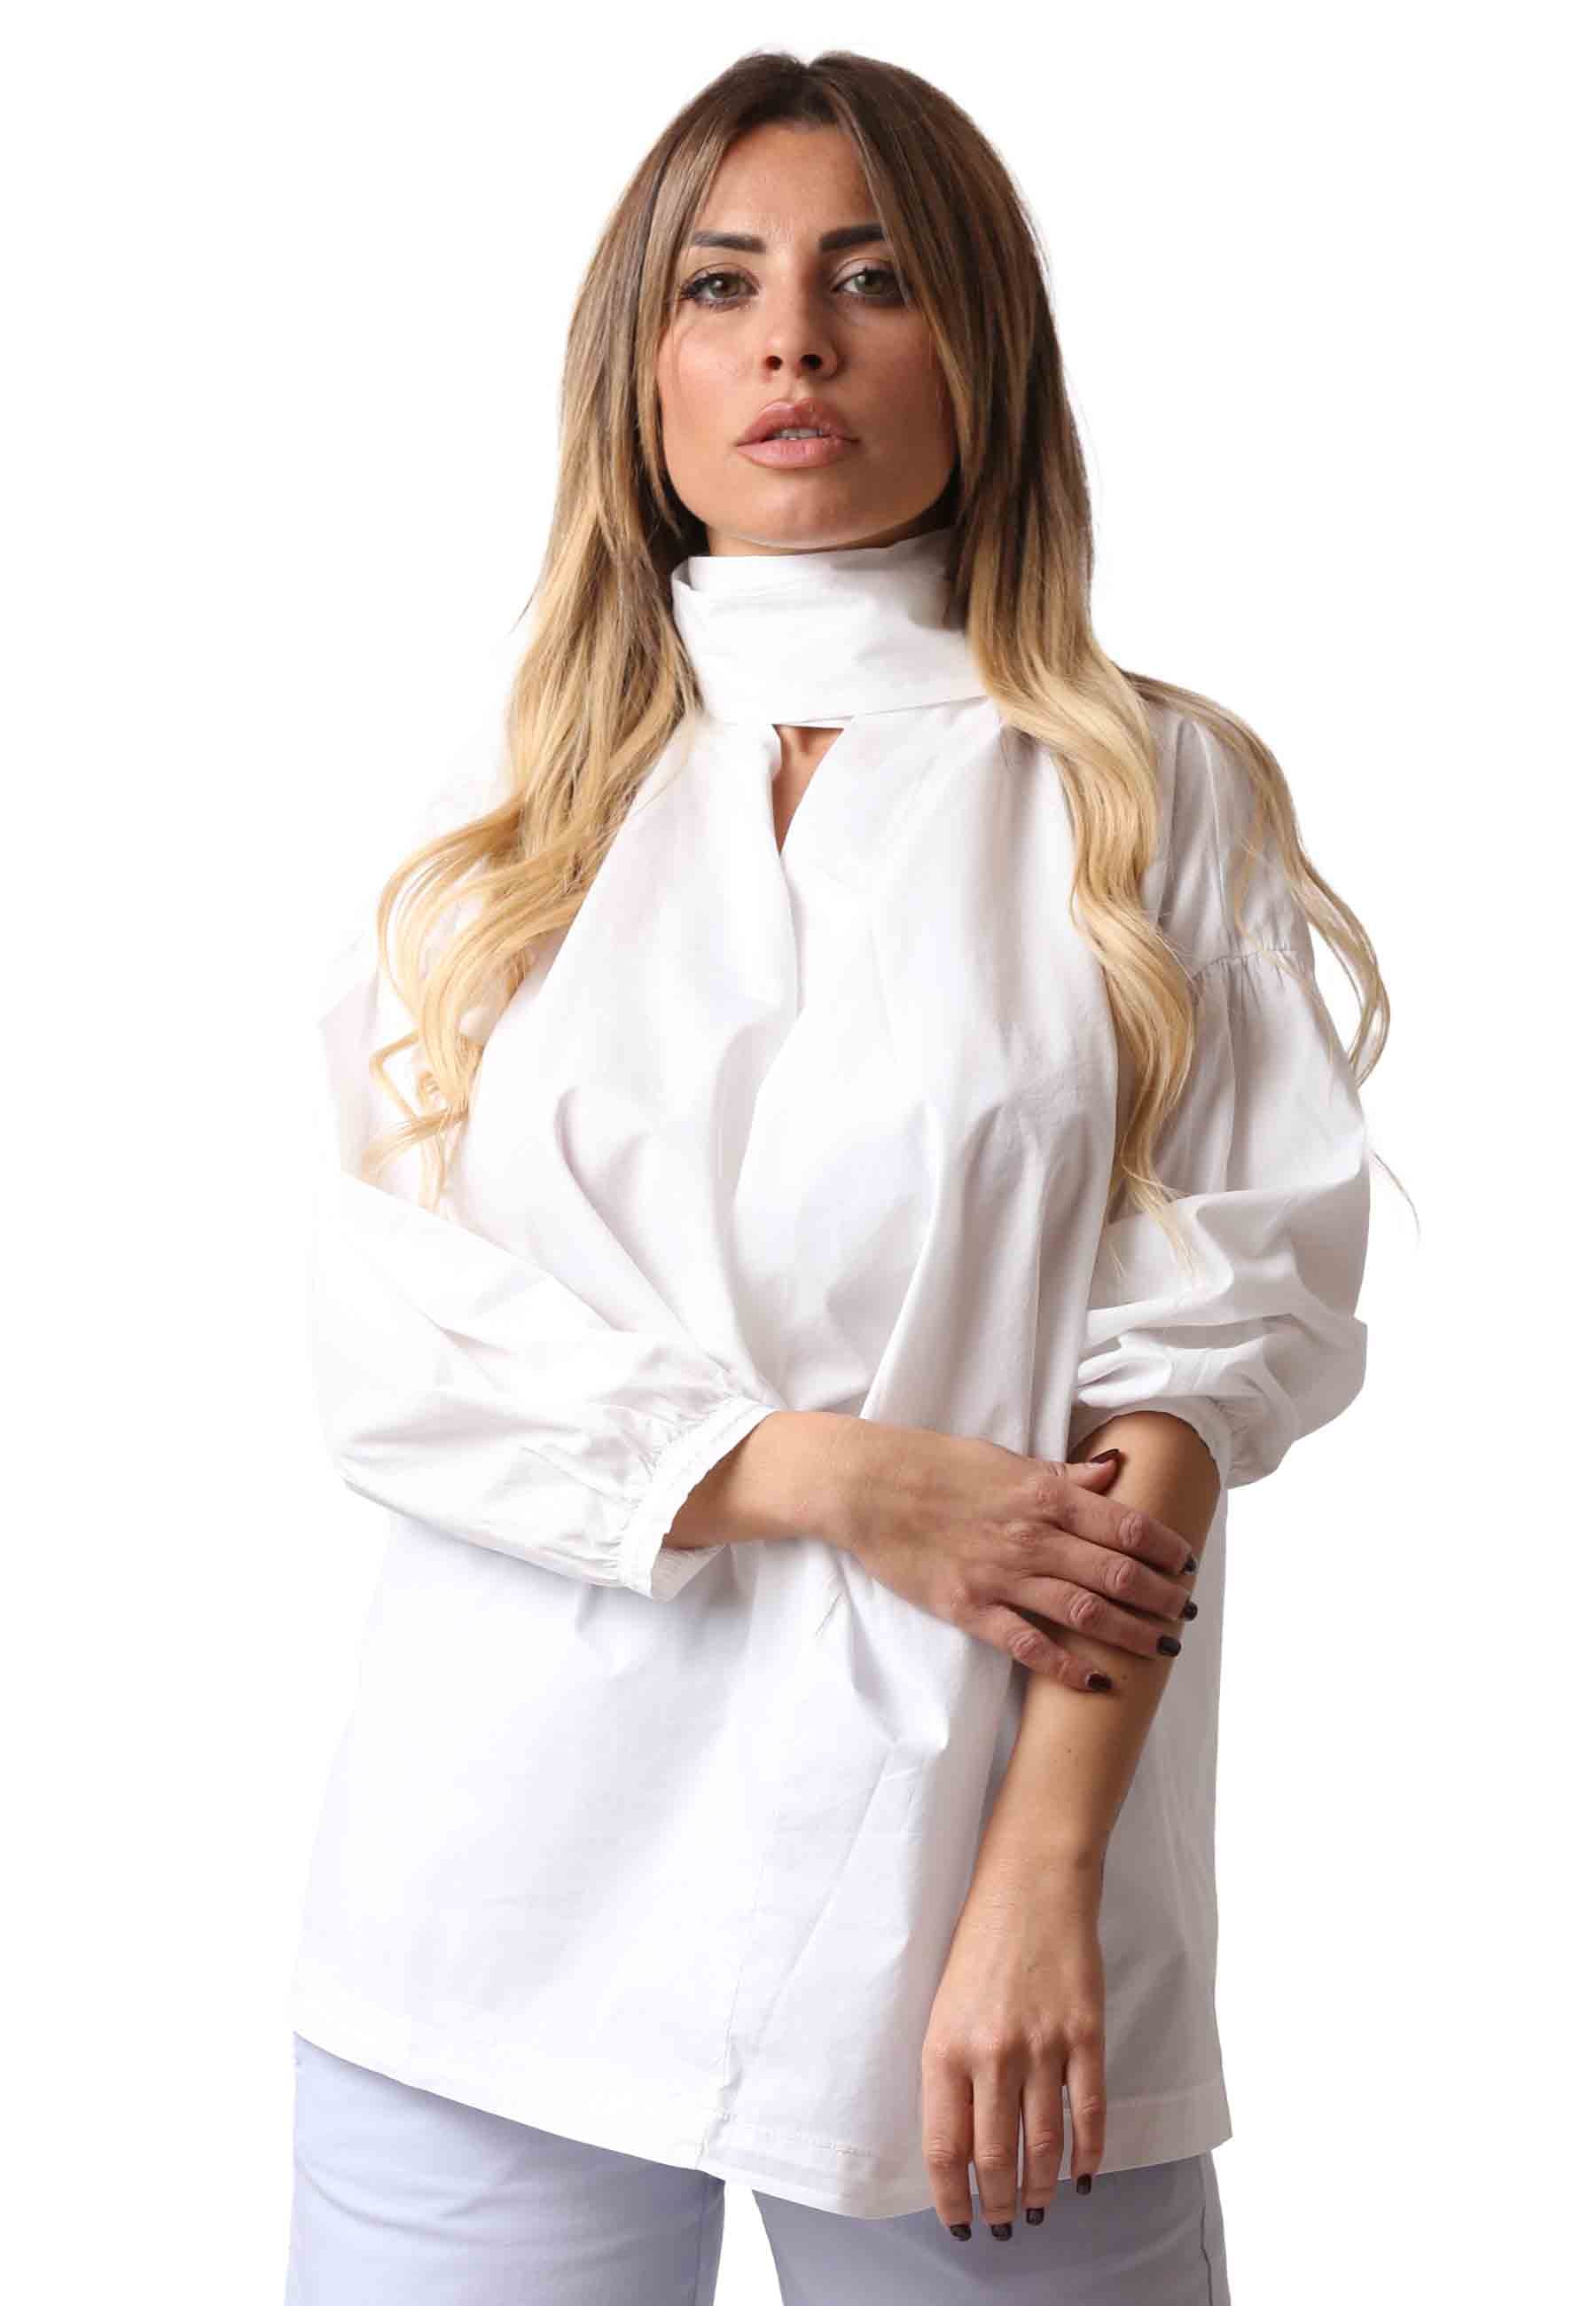 Cuscus women's shirt in white cotton with knot at the neck